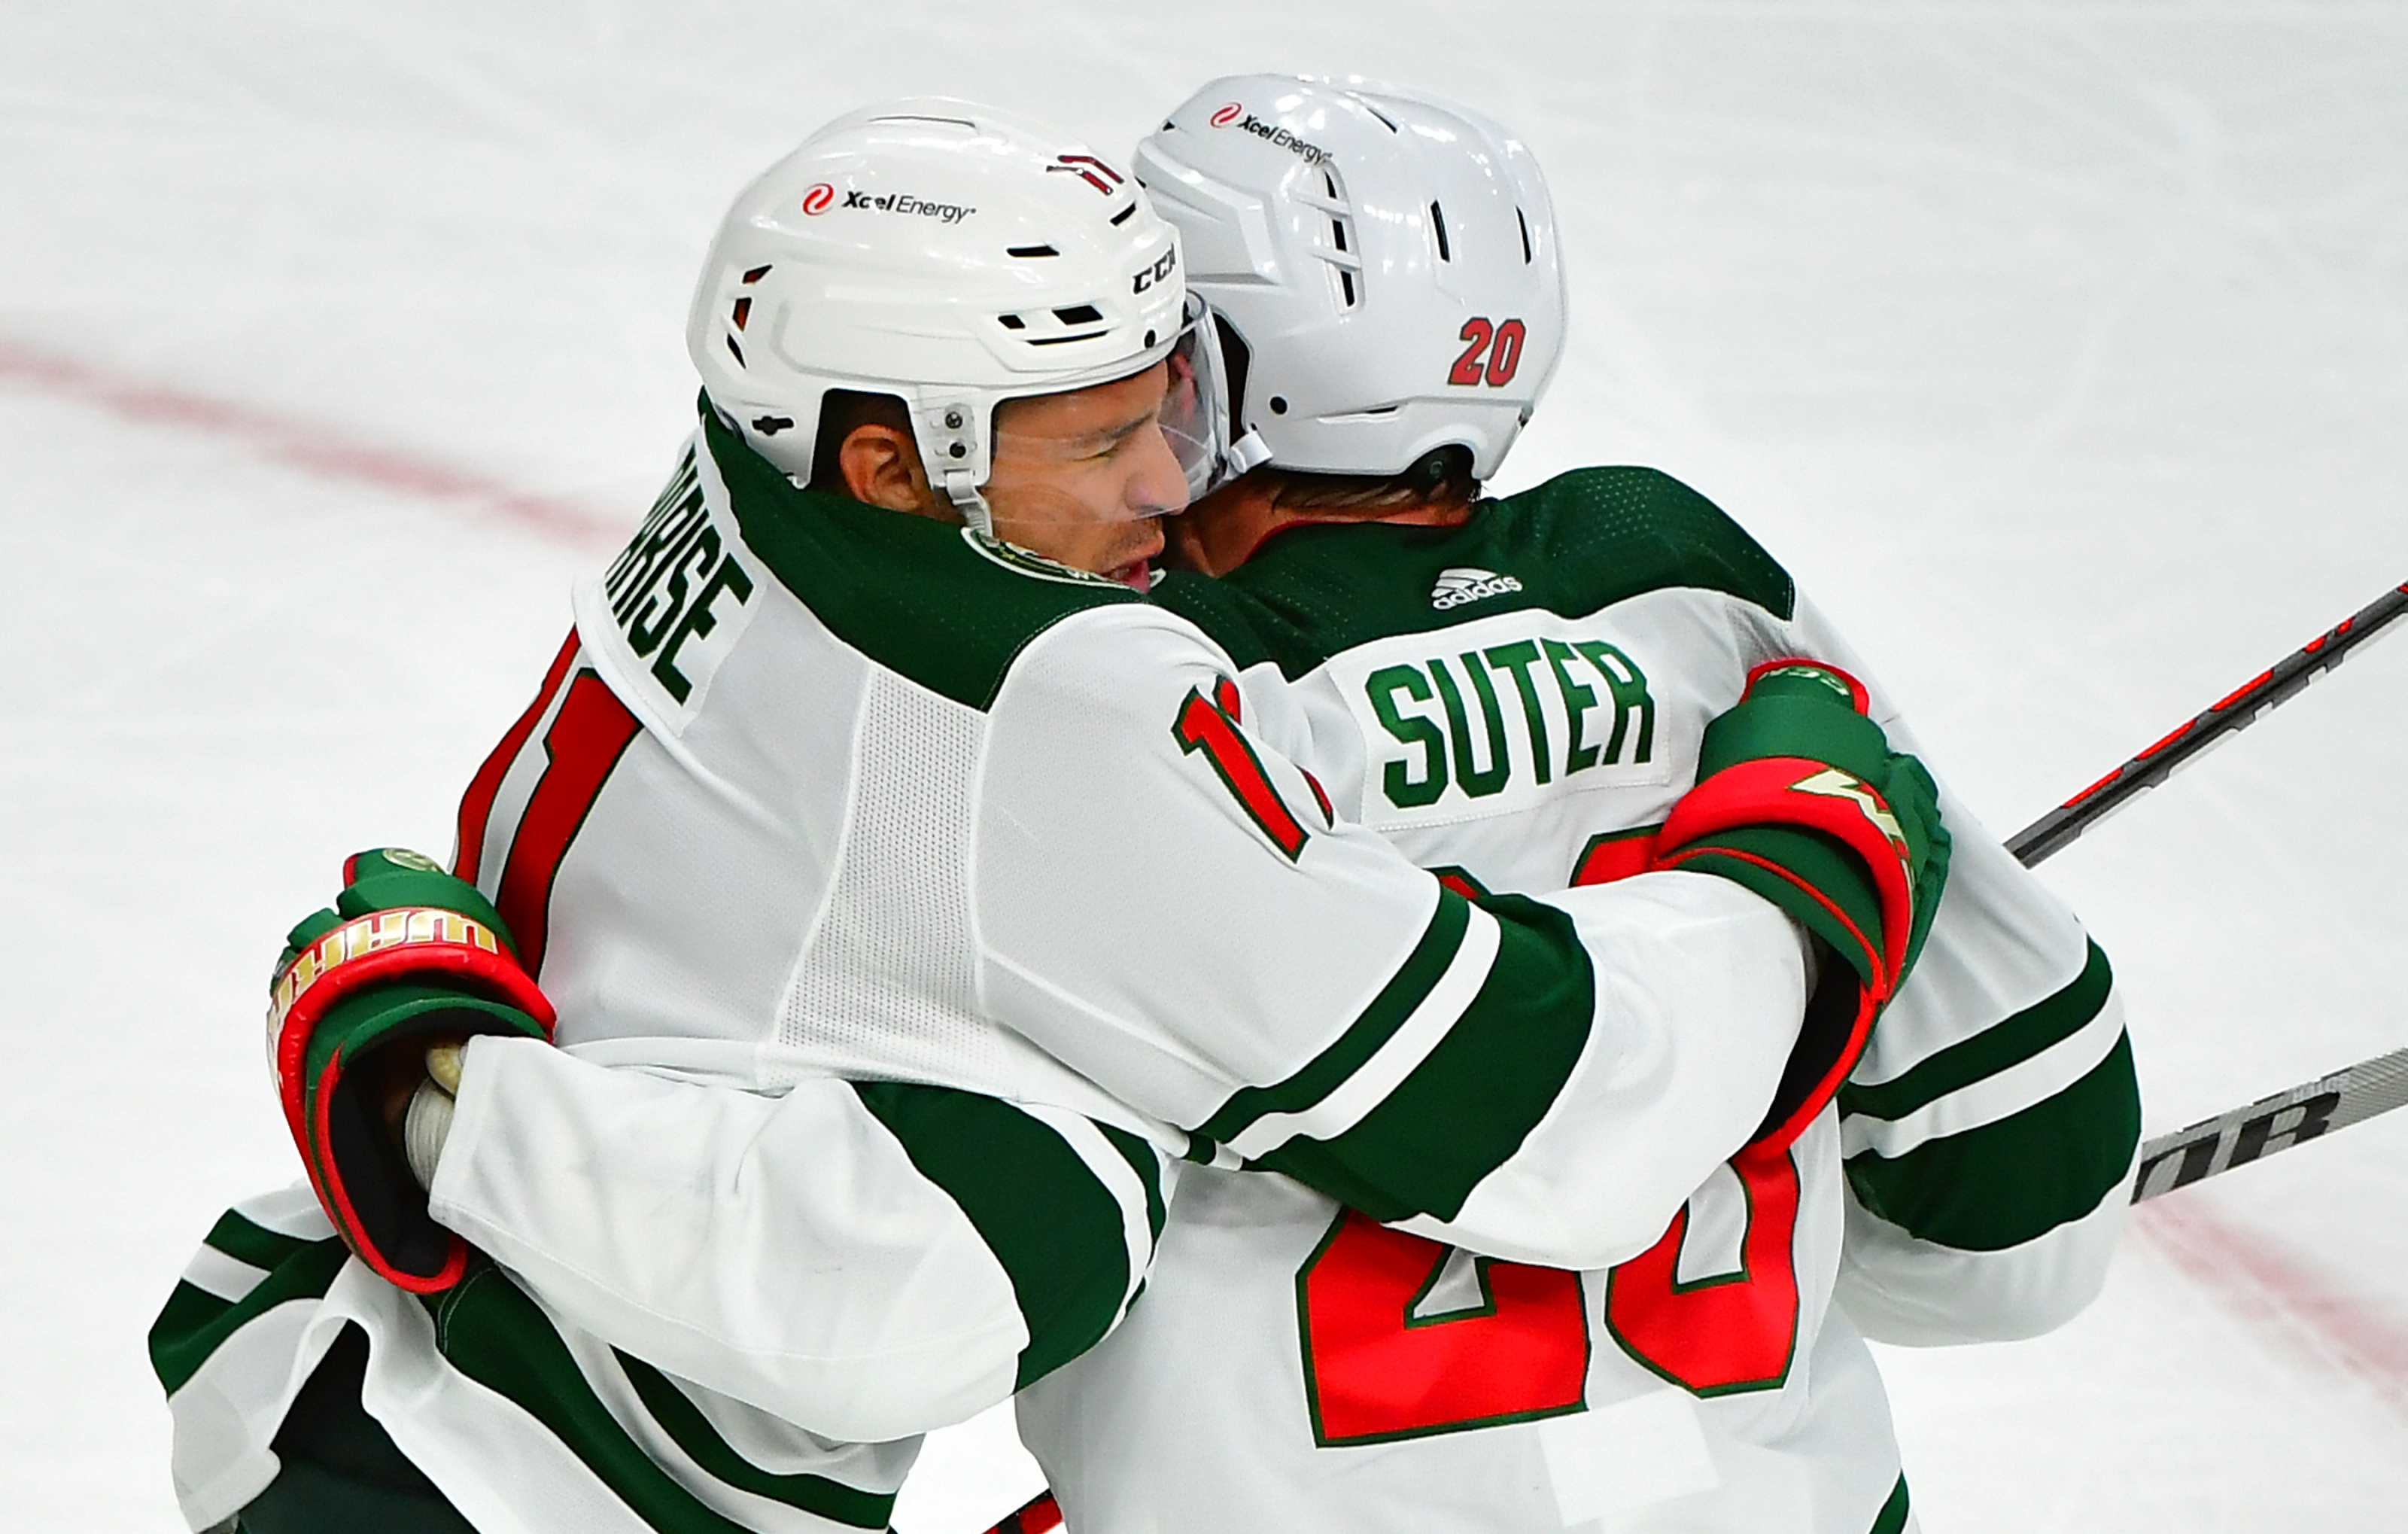 Where and How Zach Parise Scored His Goals for the New Jersey